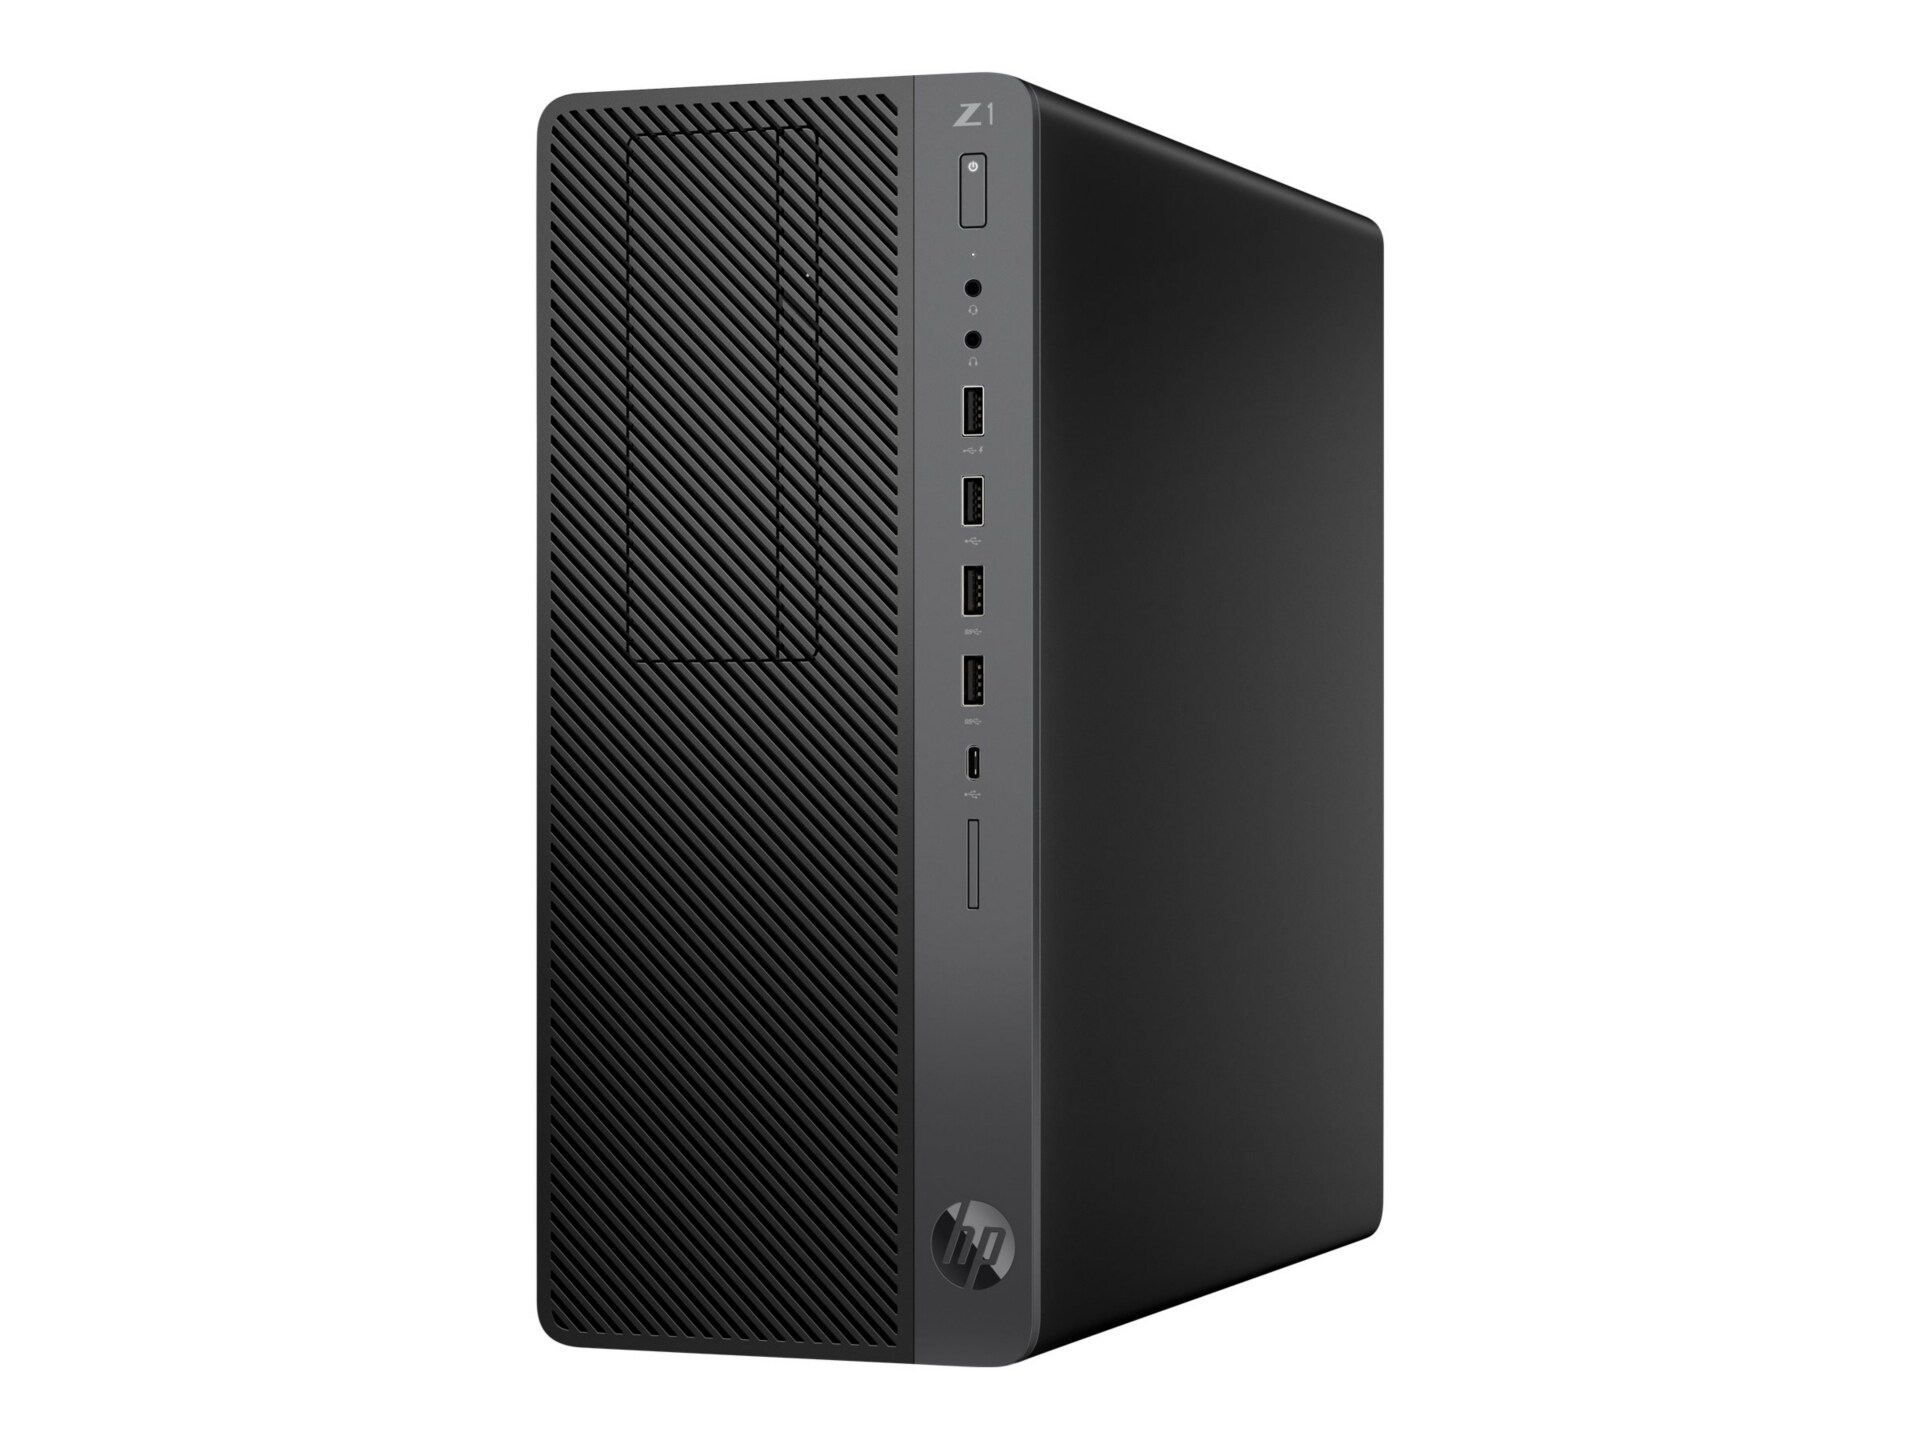 HP Workstation Z1 G5 Entry - tower - Core i5 9500 3 GHz - 8 GB - SSD 256 GB